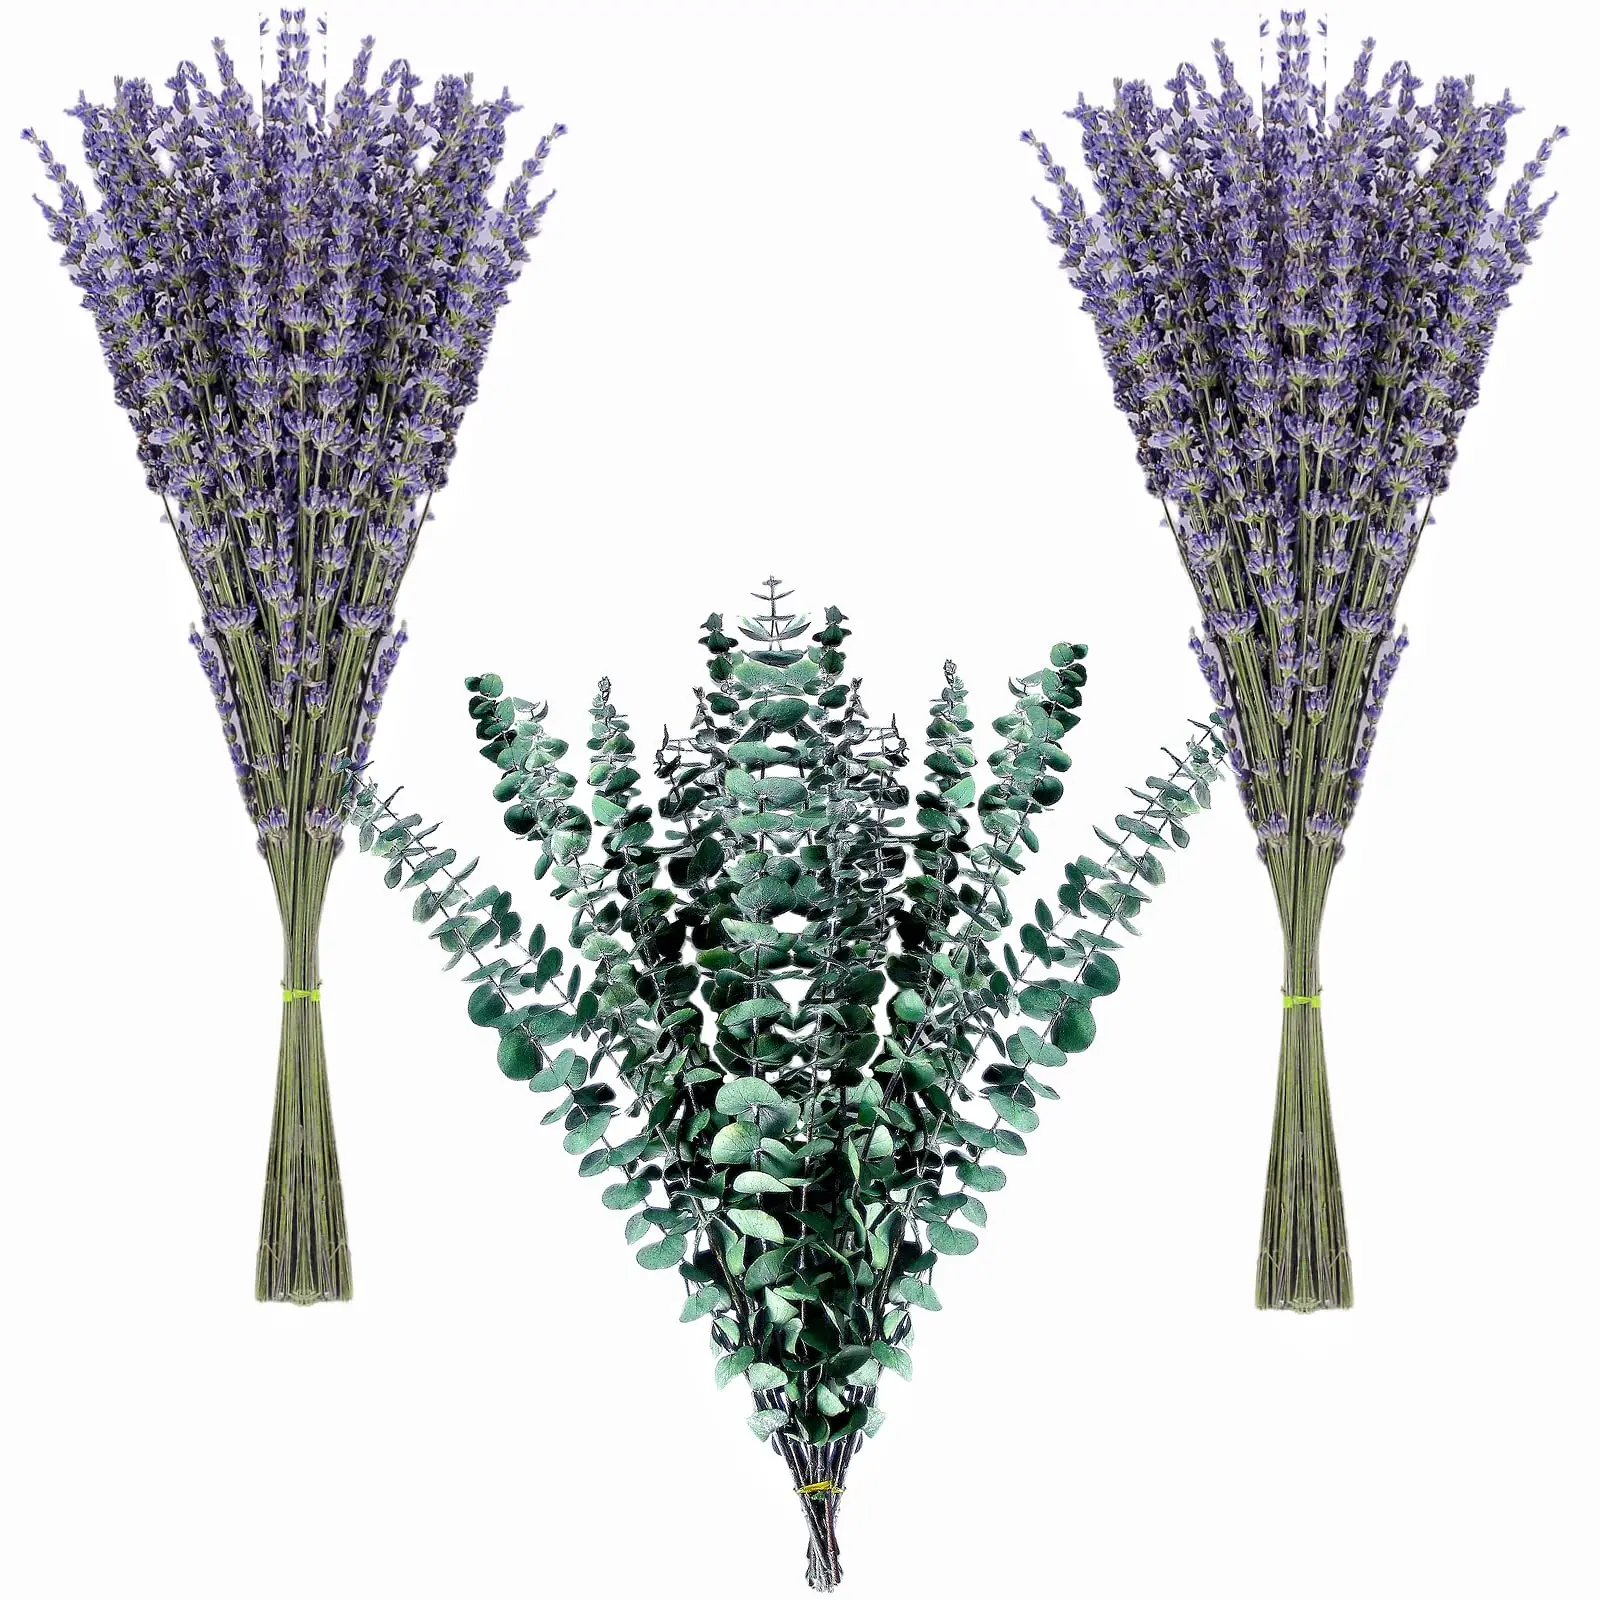 

130 Stems Dried Lavender Flowers and Shower Eucalyptus Hanging Bouquet,Eucalyptus Leaves Home Bathroom,Living Room Kitchen Decor